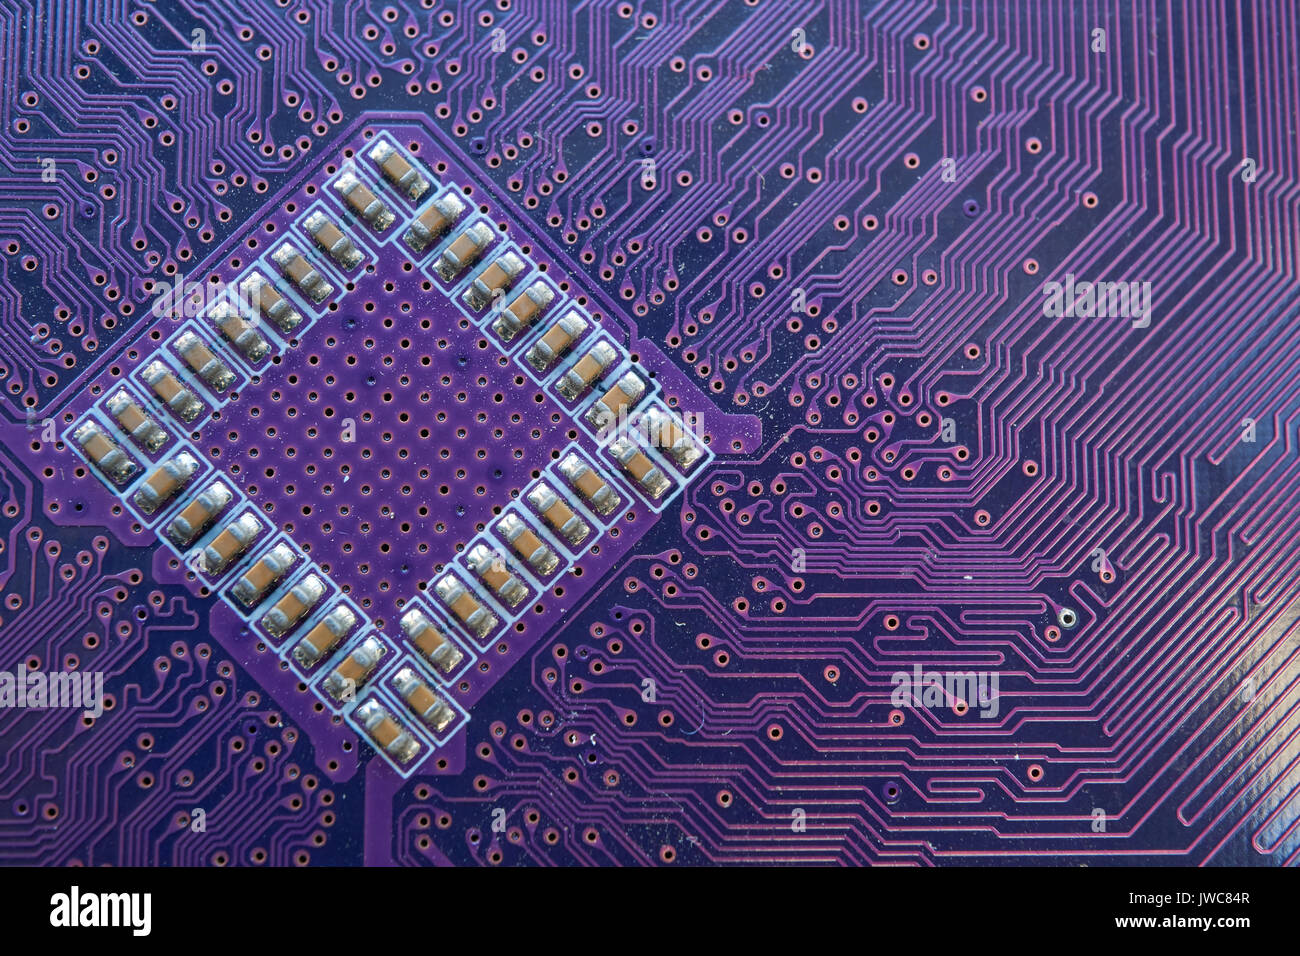 back side of computer motherboard with transistors chip soldered and lot of  tracks circuits. closeup shot in violet color palette Stock Photo - Alamy